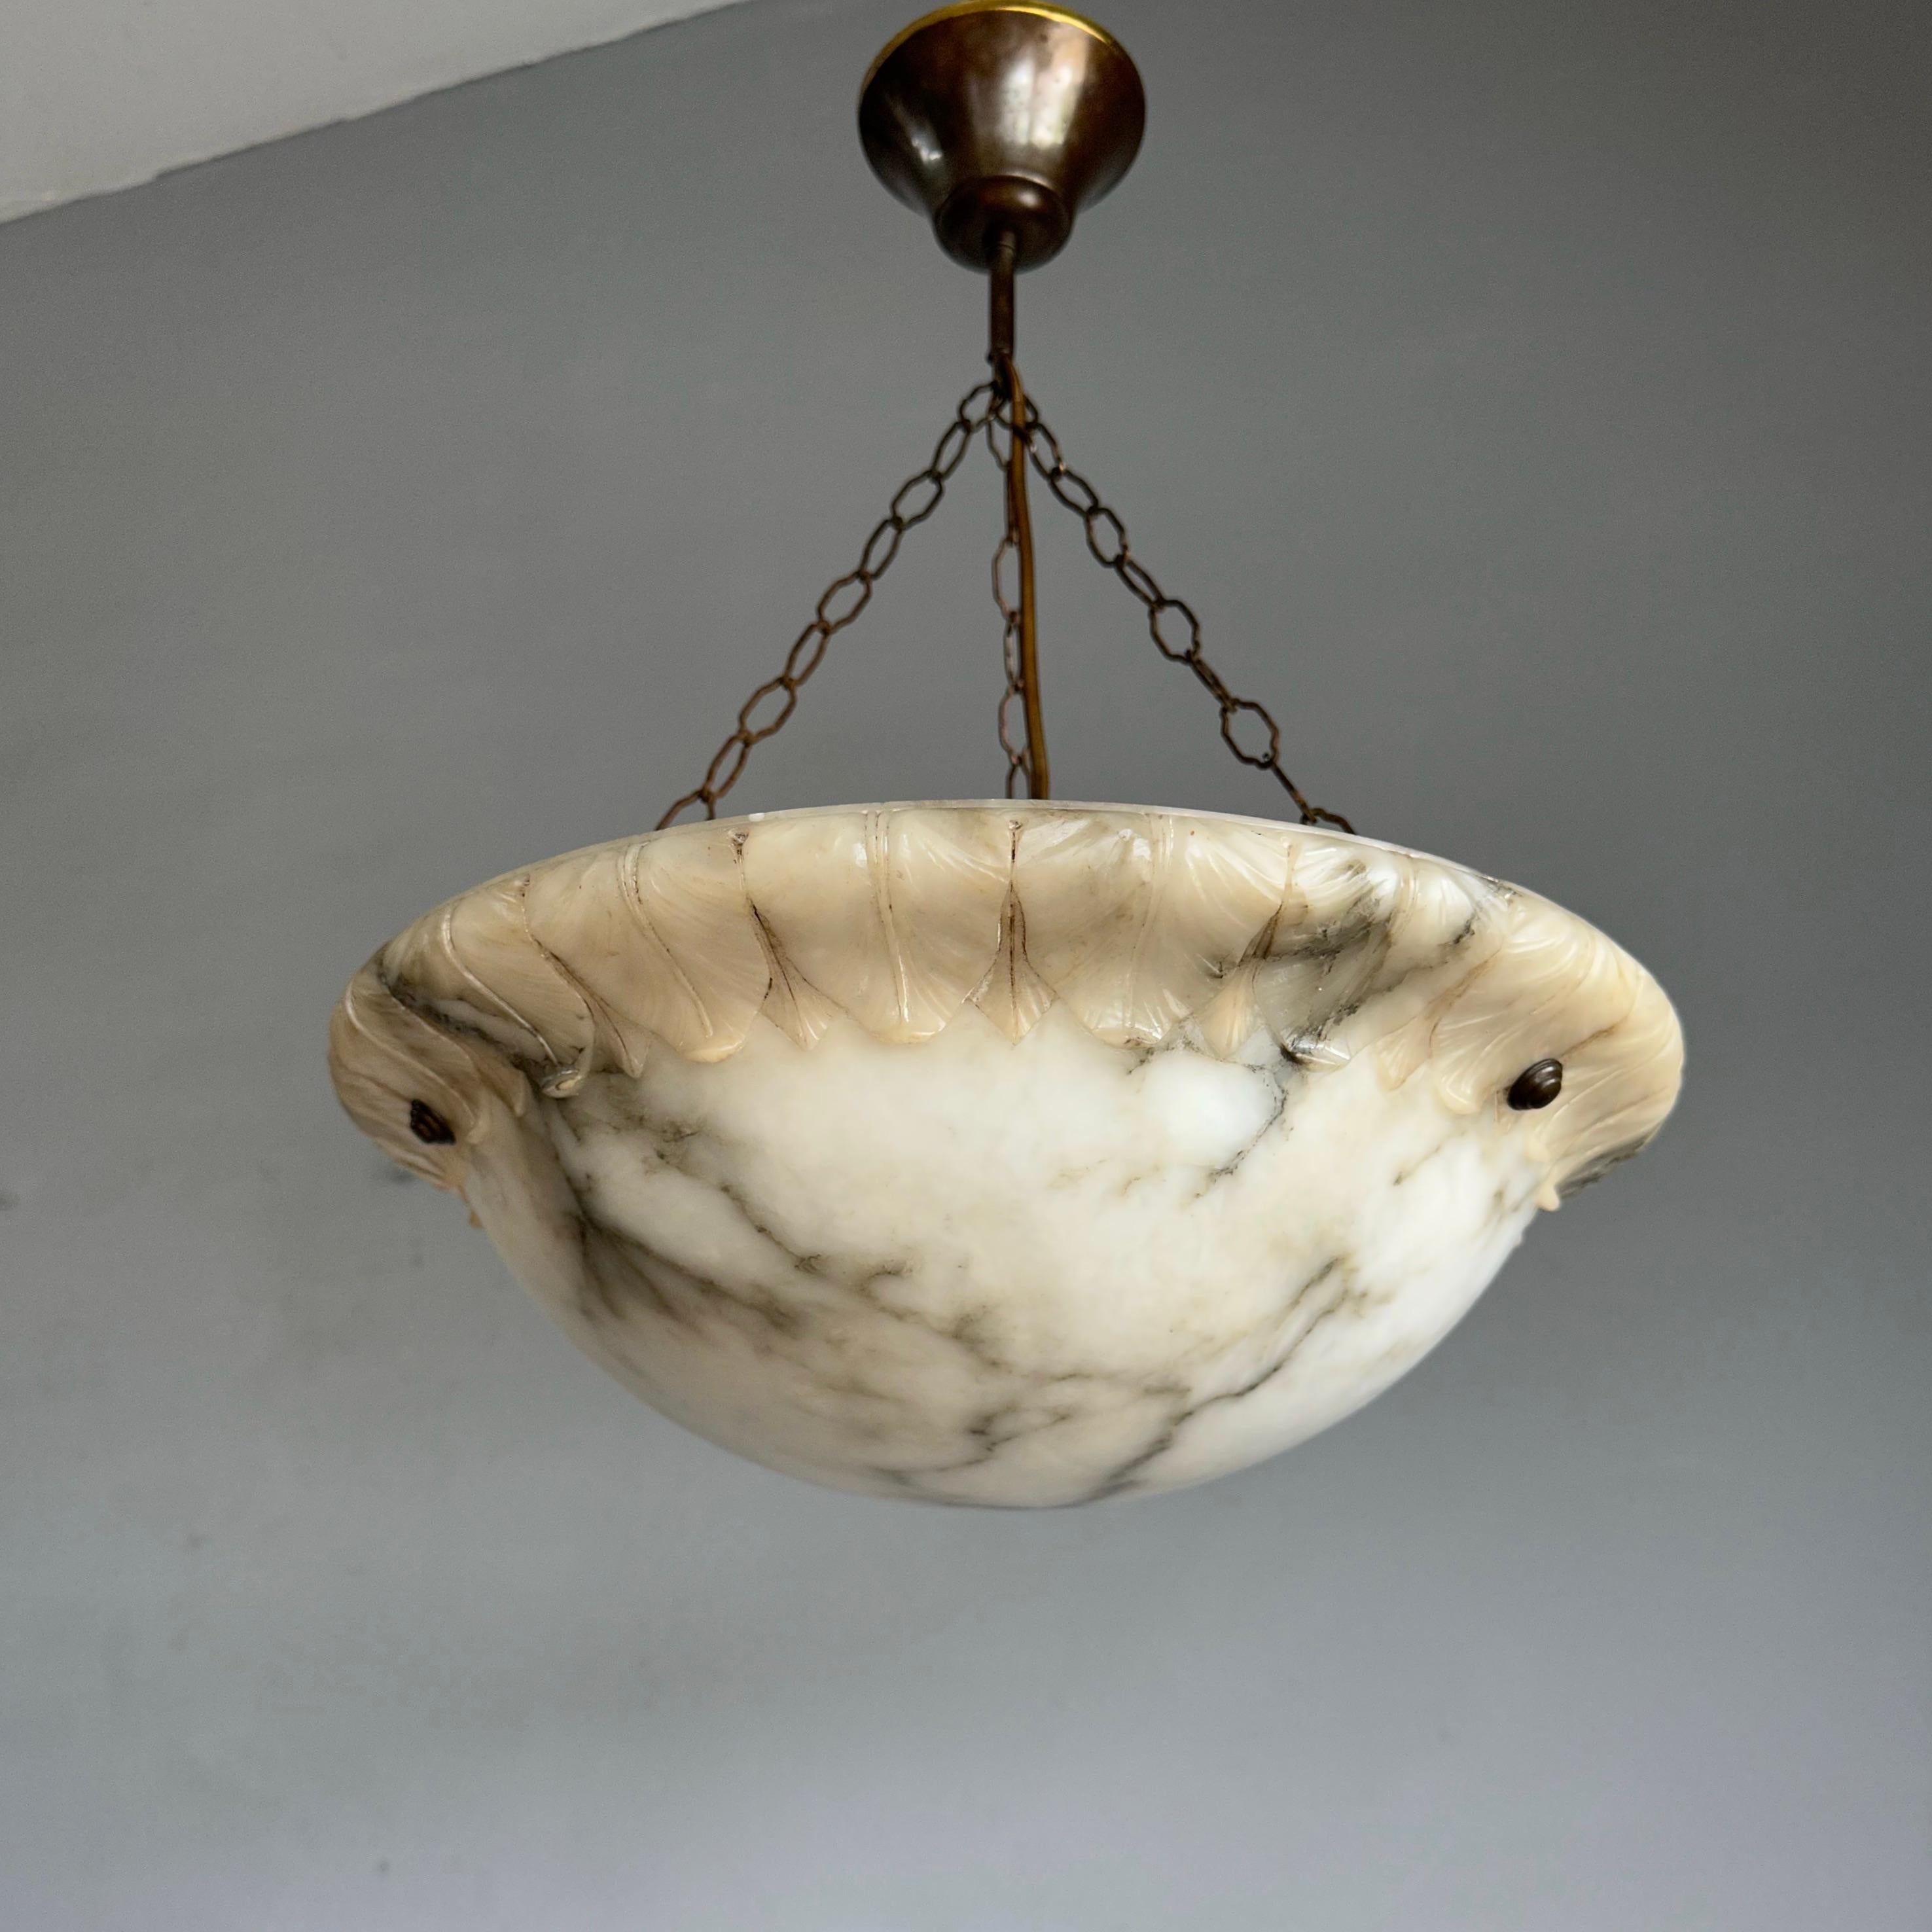 Great Looking Antique and Mint Condition White & Black Alabaster Pendant Light 1